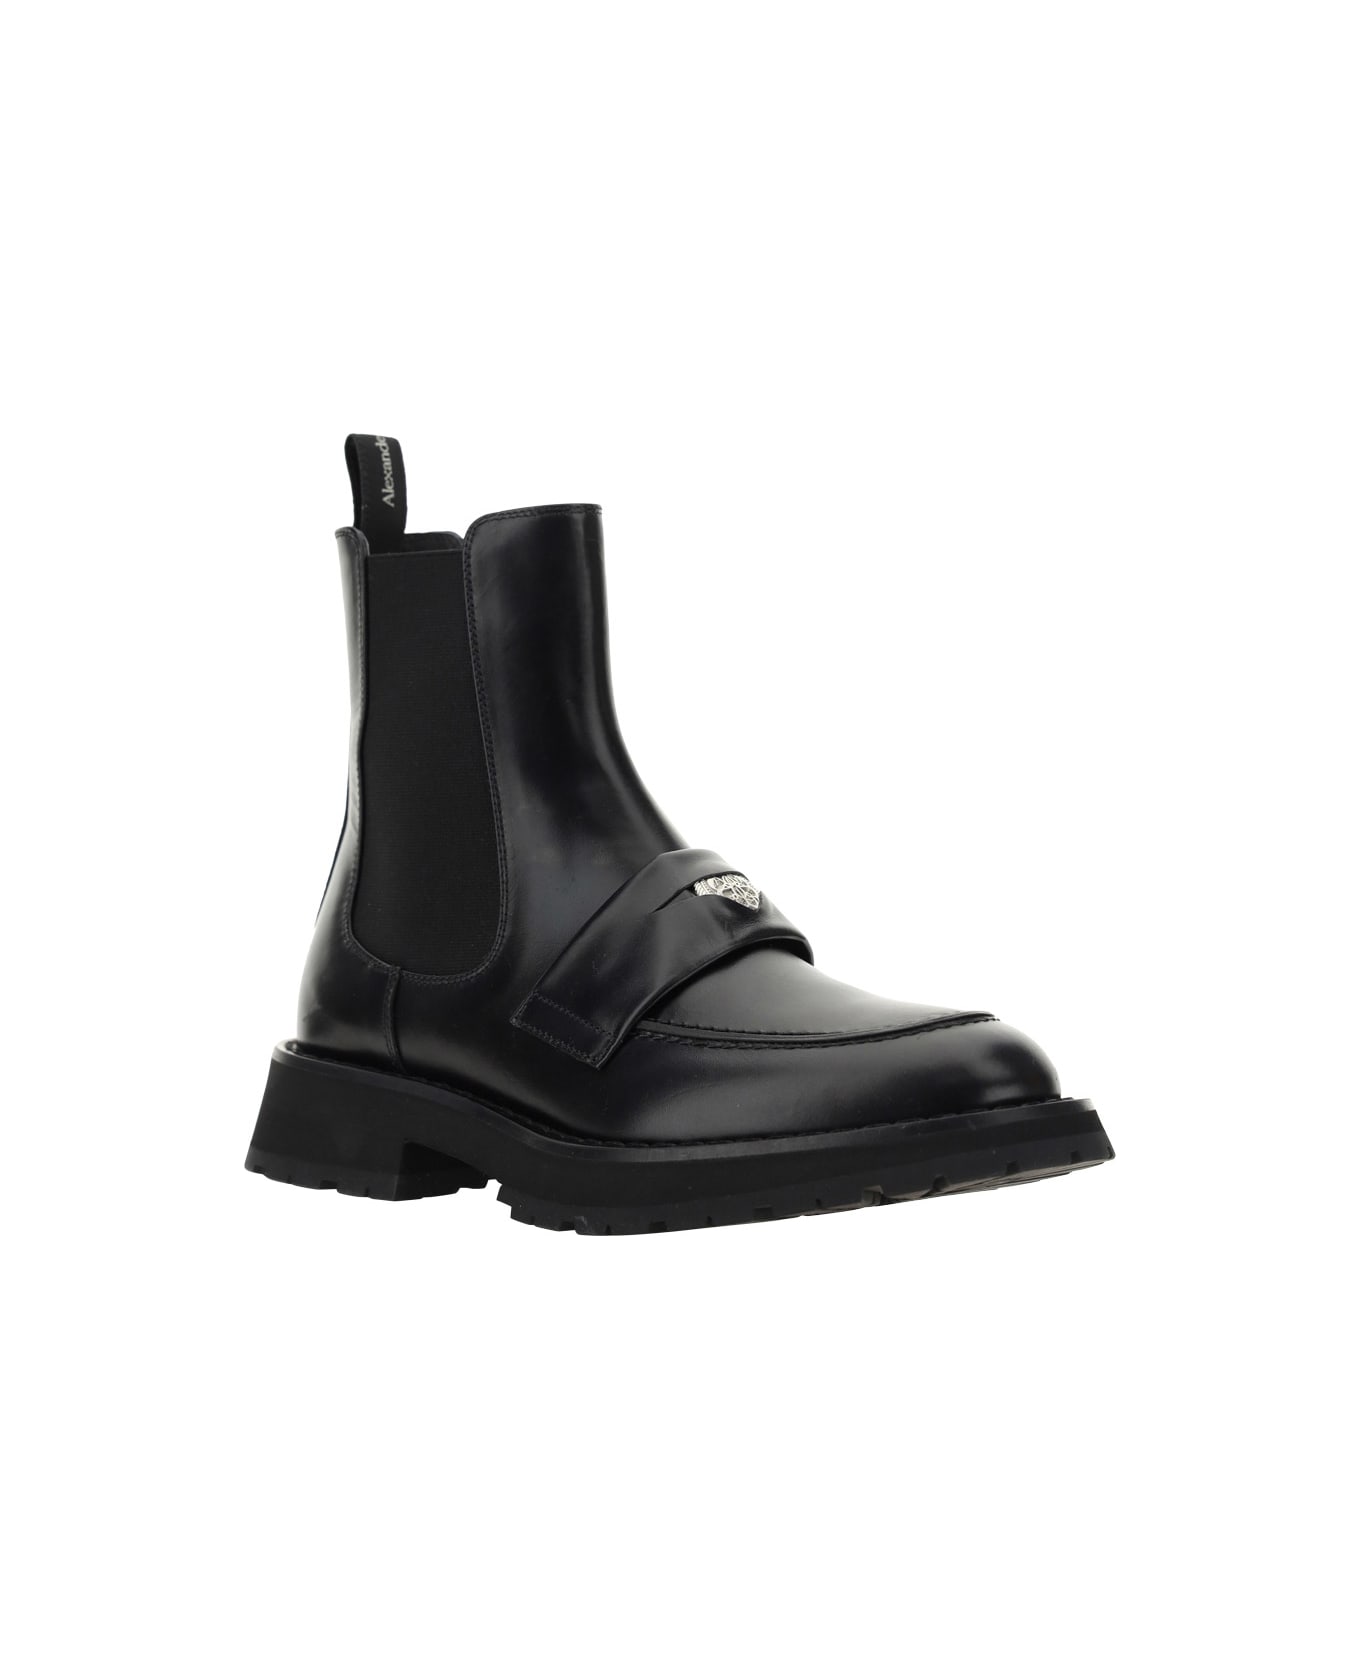 Alexander McQueen Ankle Boots - Black/black/silver